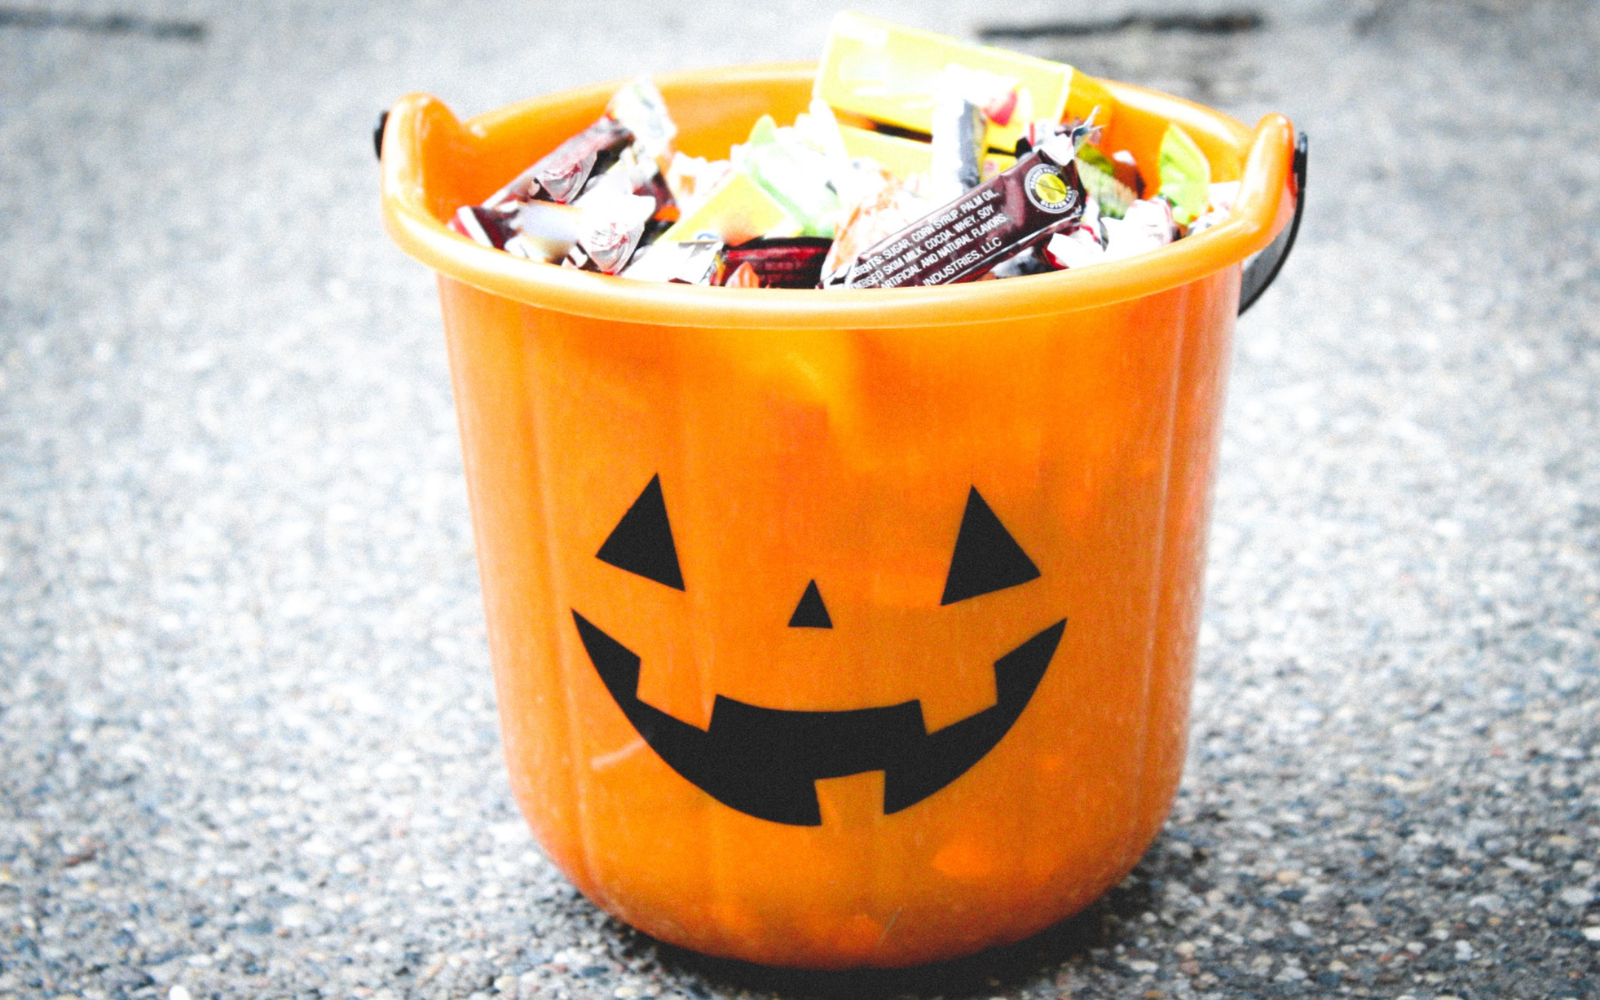 It's Halloween, which means lots of candy. Before you panic, I wanted to remind you of a process called habituation. Written by Jennifer Neale, Registered Dietitian, Certified Intuitive Eating Counsellor, and owner of Nutrition IQ in Ottawa Ontario.